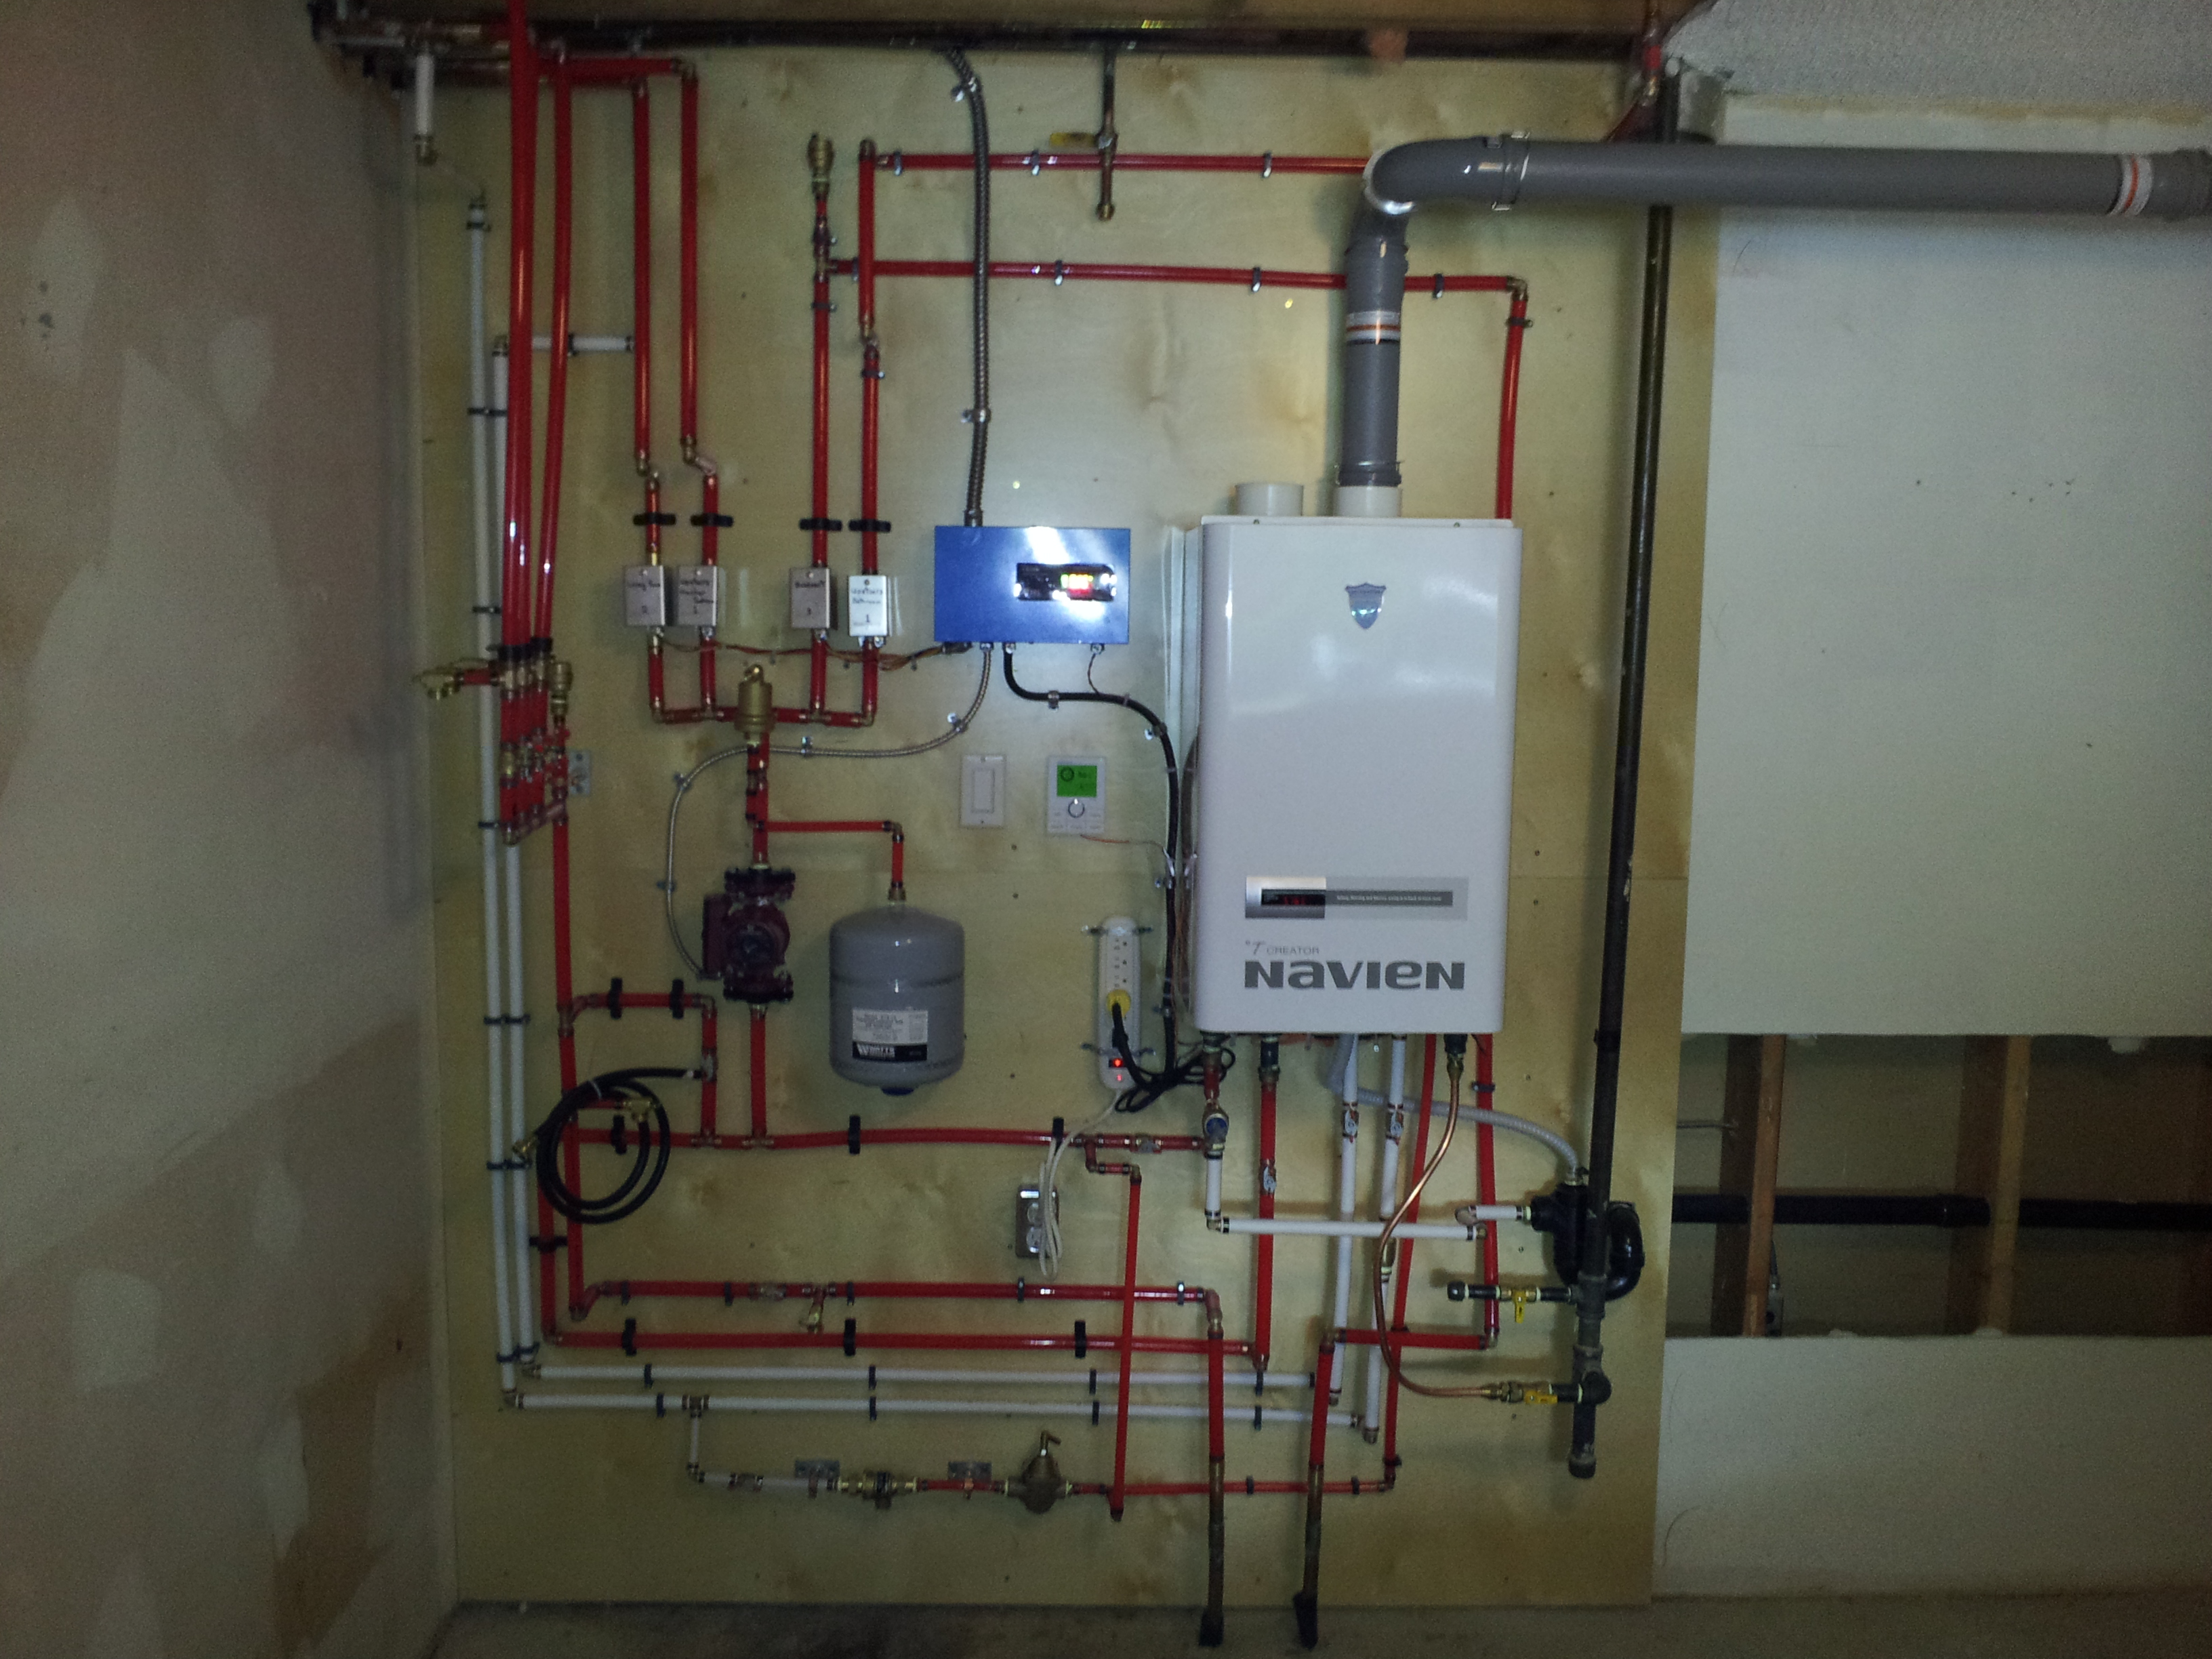 navian-tankless-boiler-used-for-hydronic-heating-and-domestic-hot-water